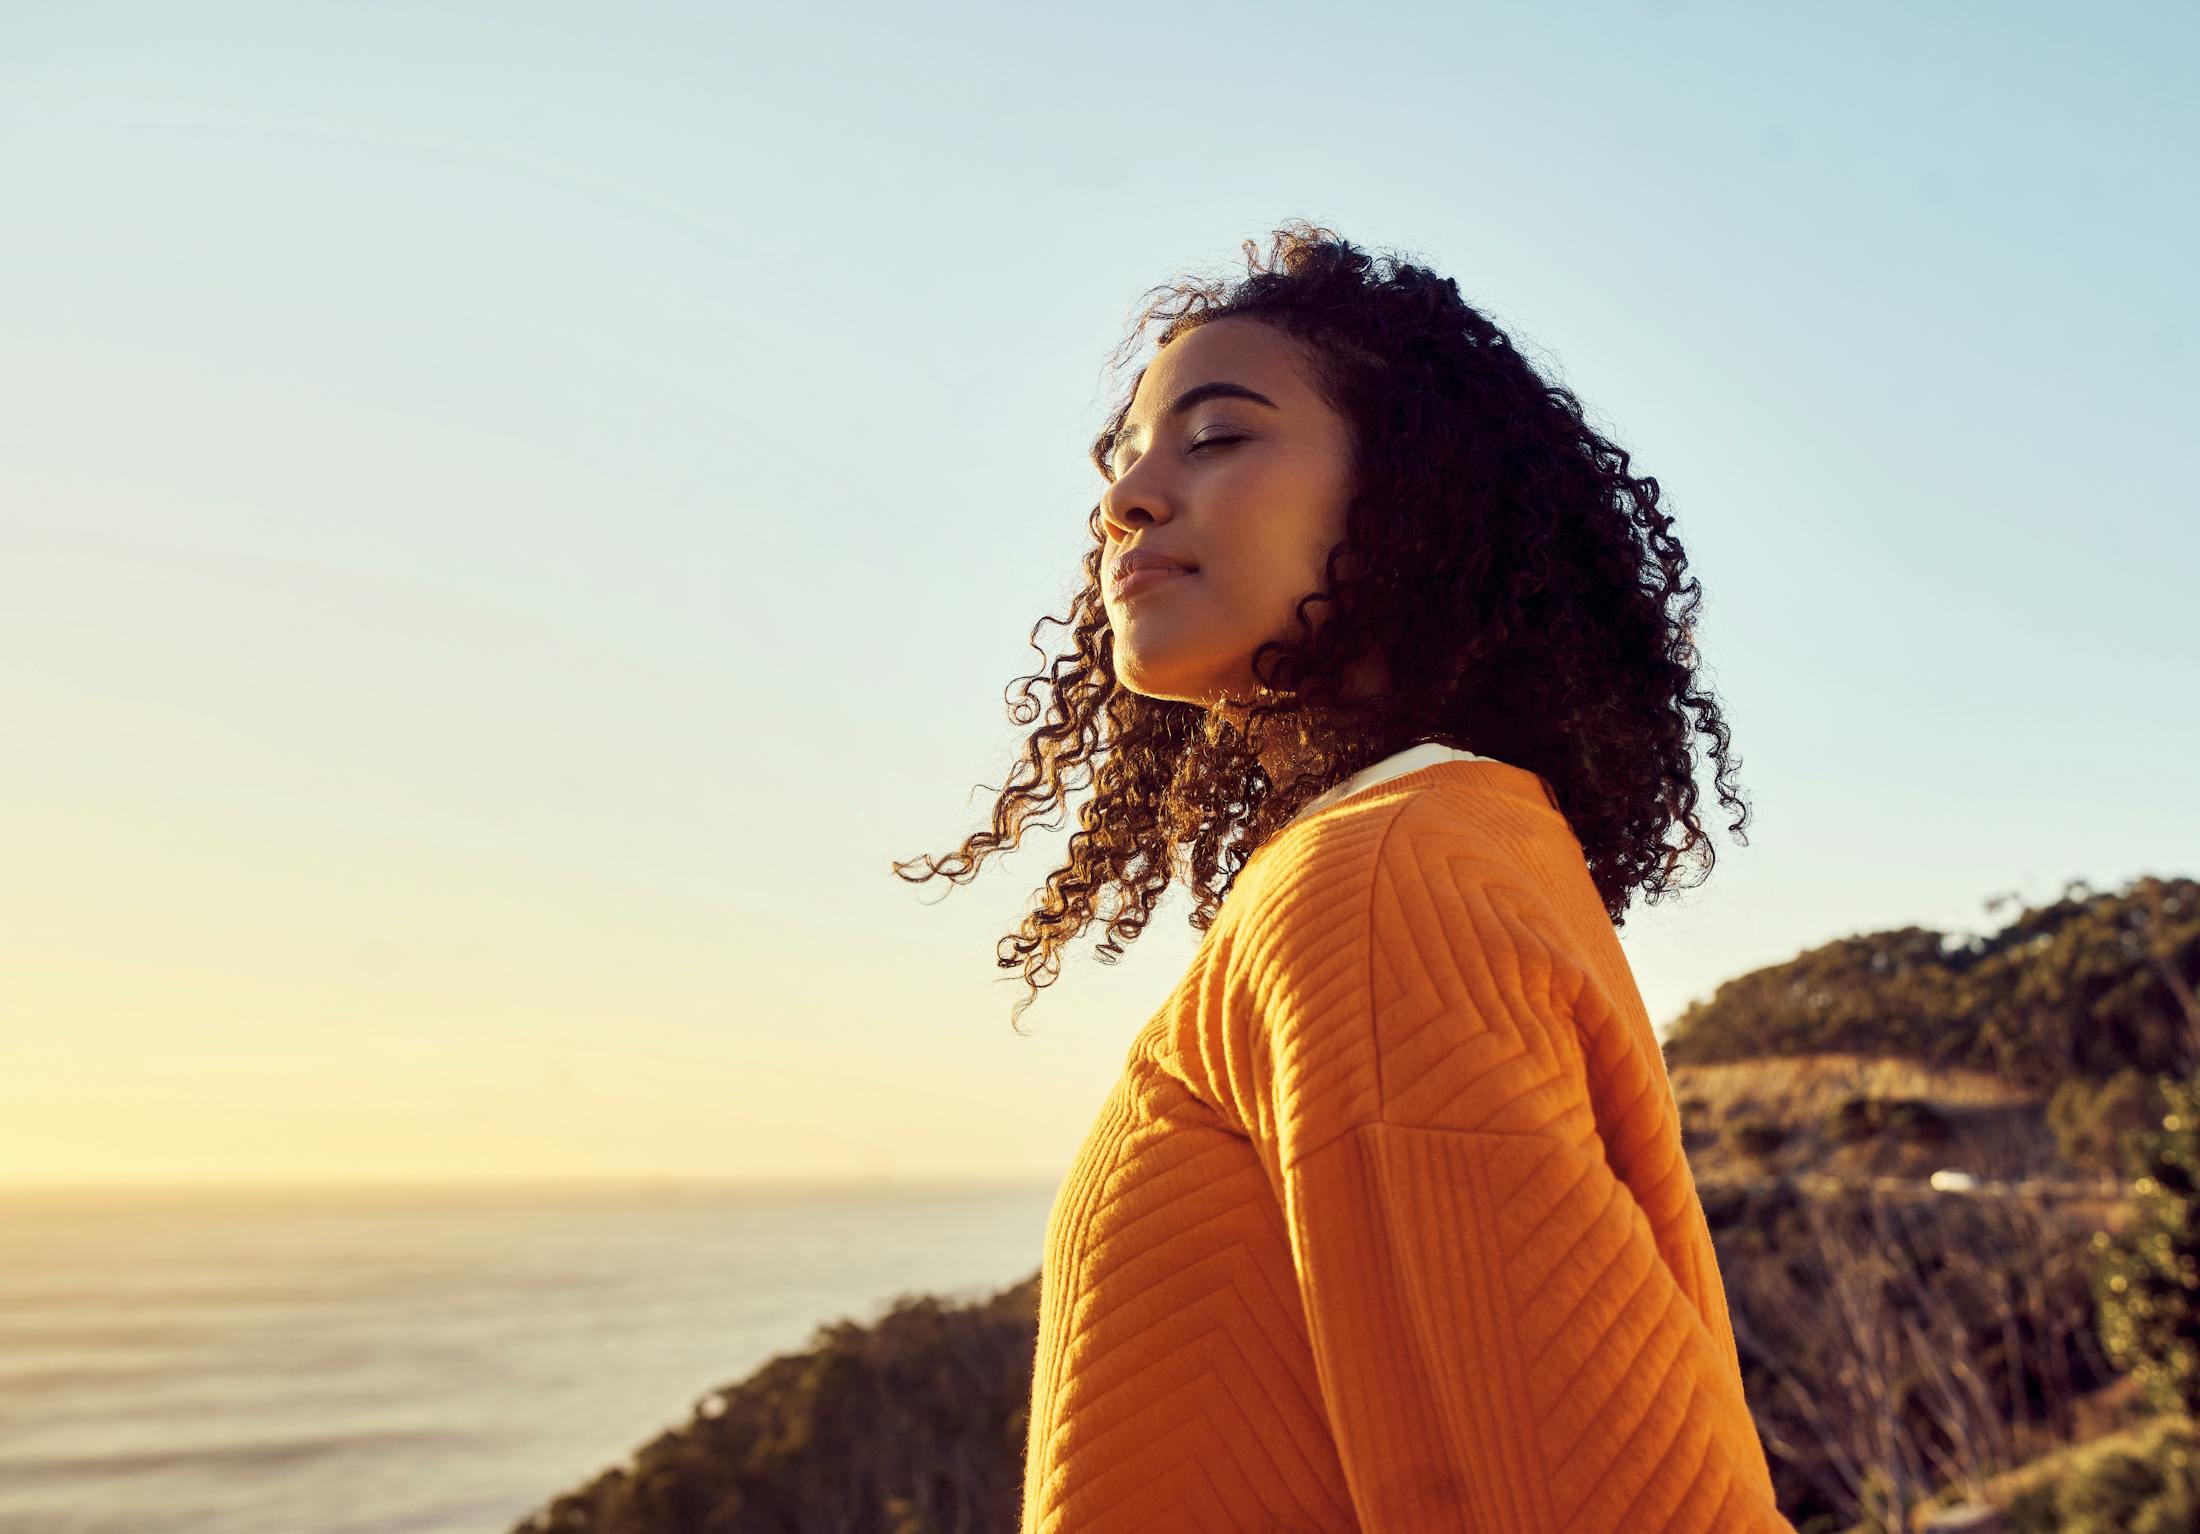 Woman Standing on a Hill by the Ocean with an Orange Sweater and Curly Dark Hair